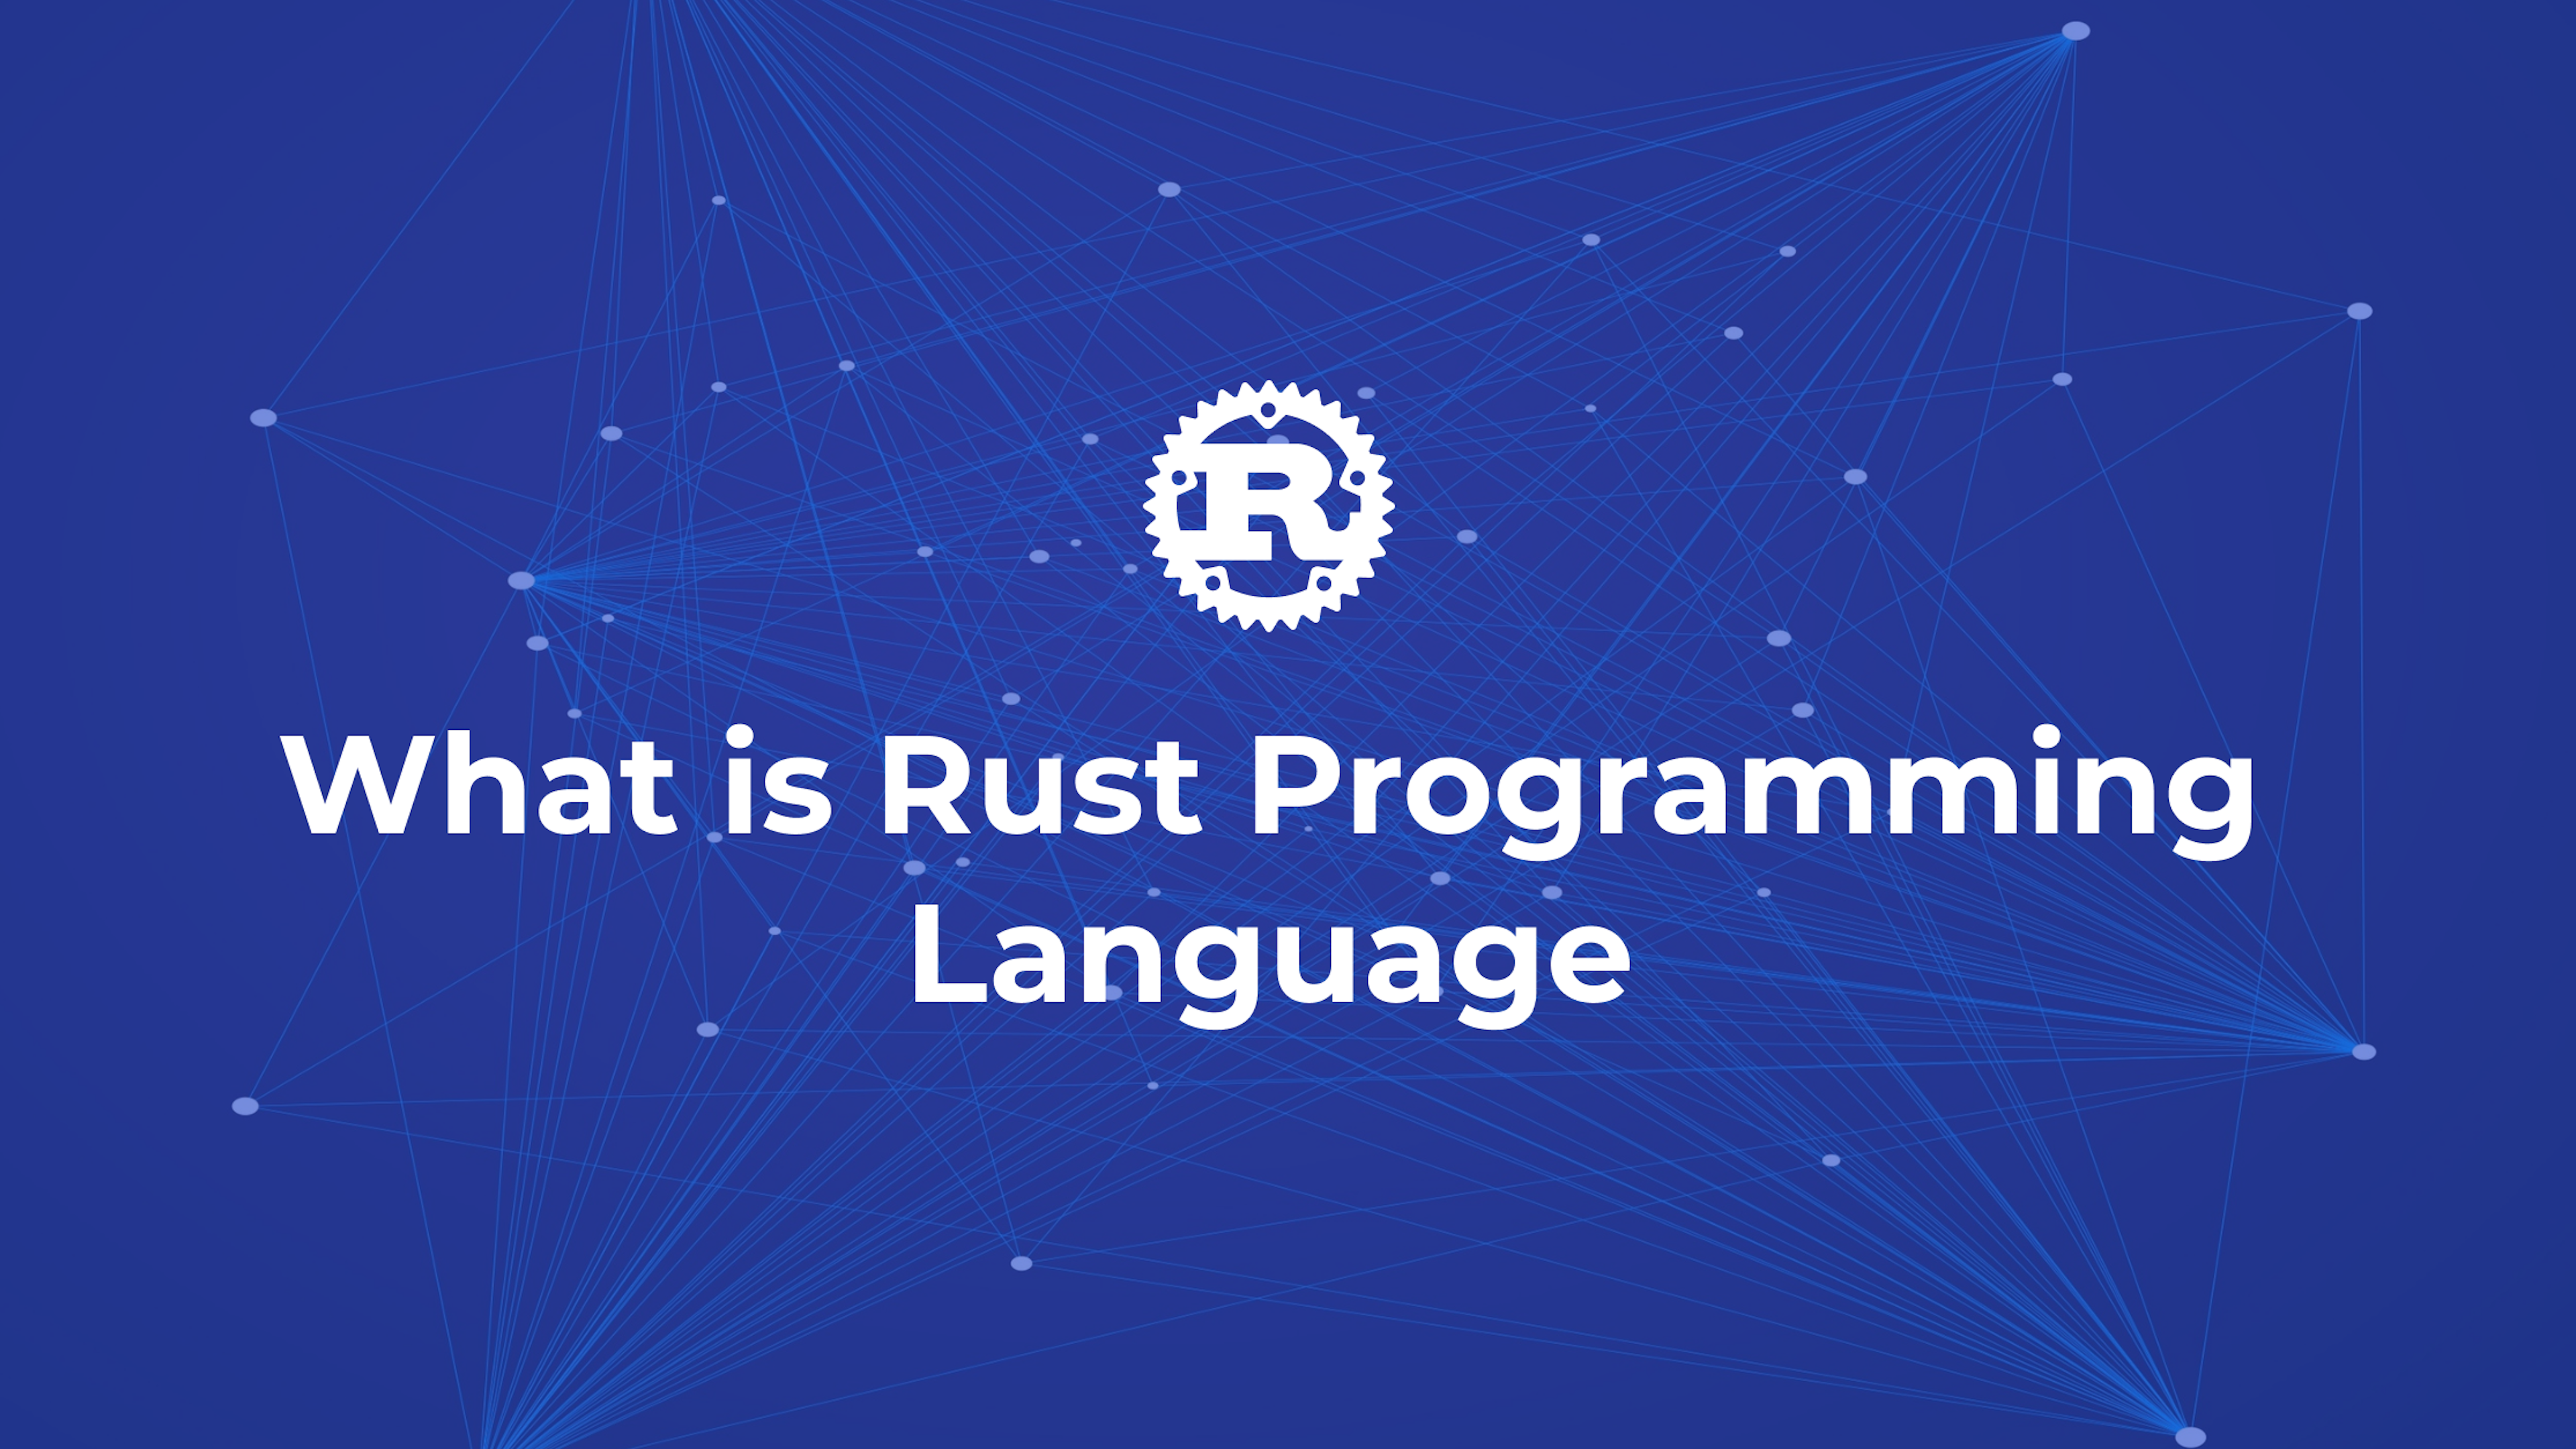 What is Rust Programming Language and Why it is Popular